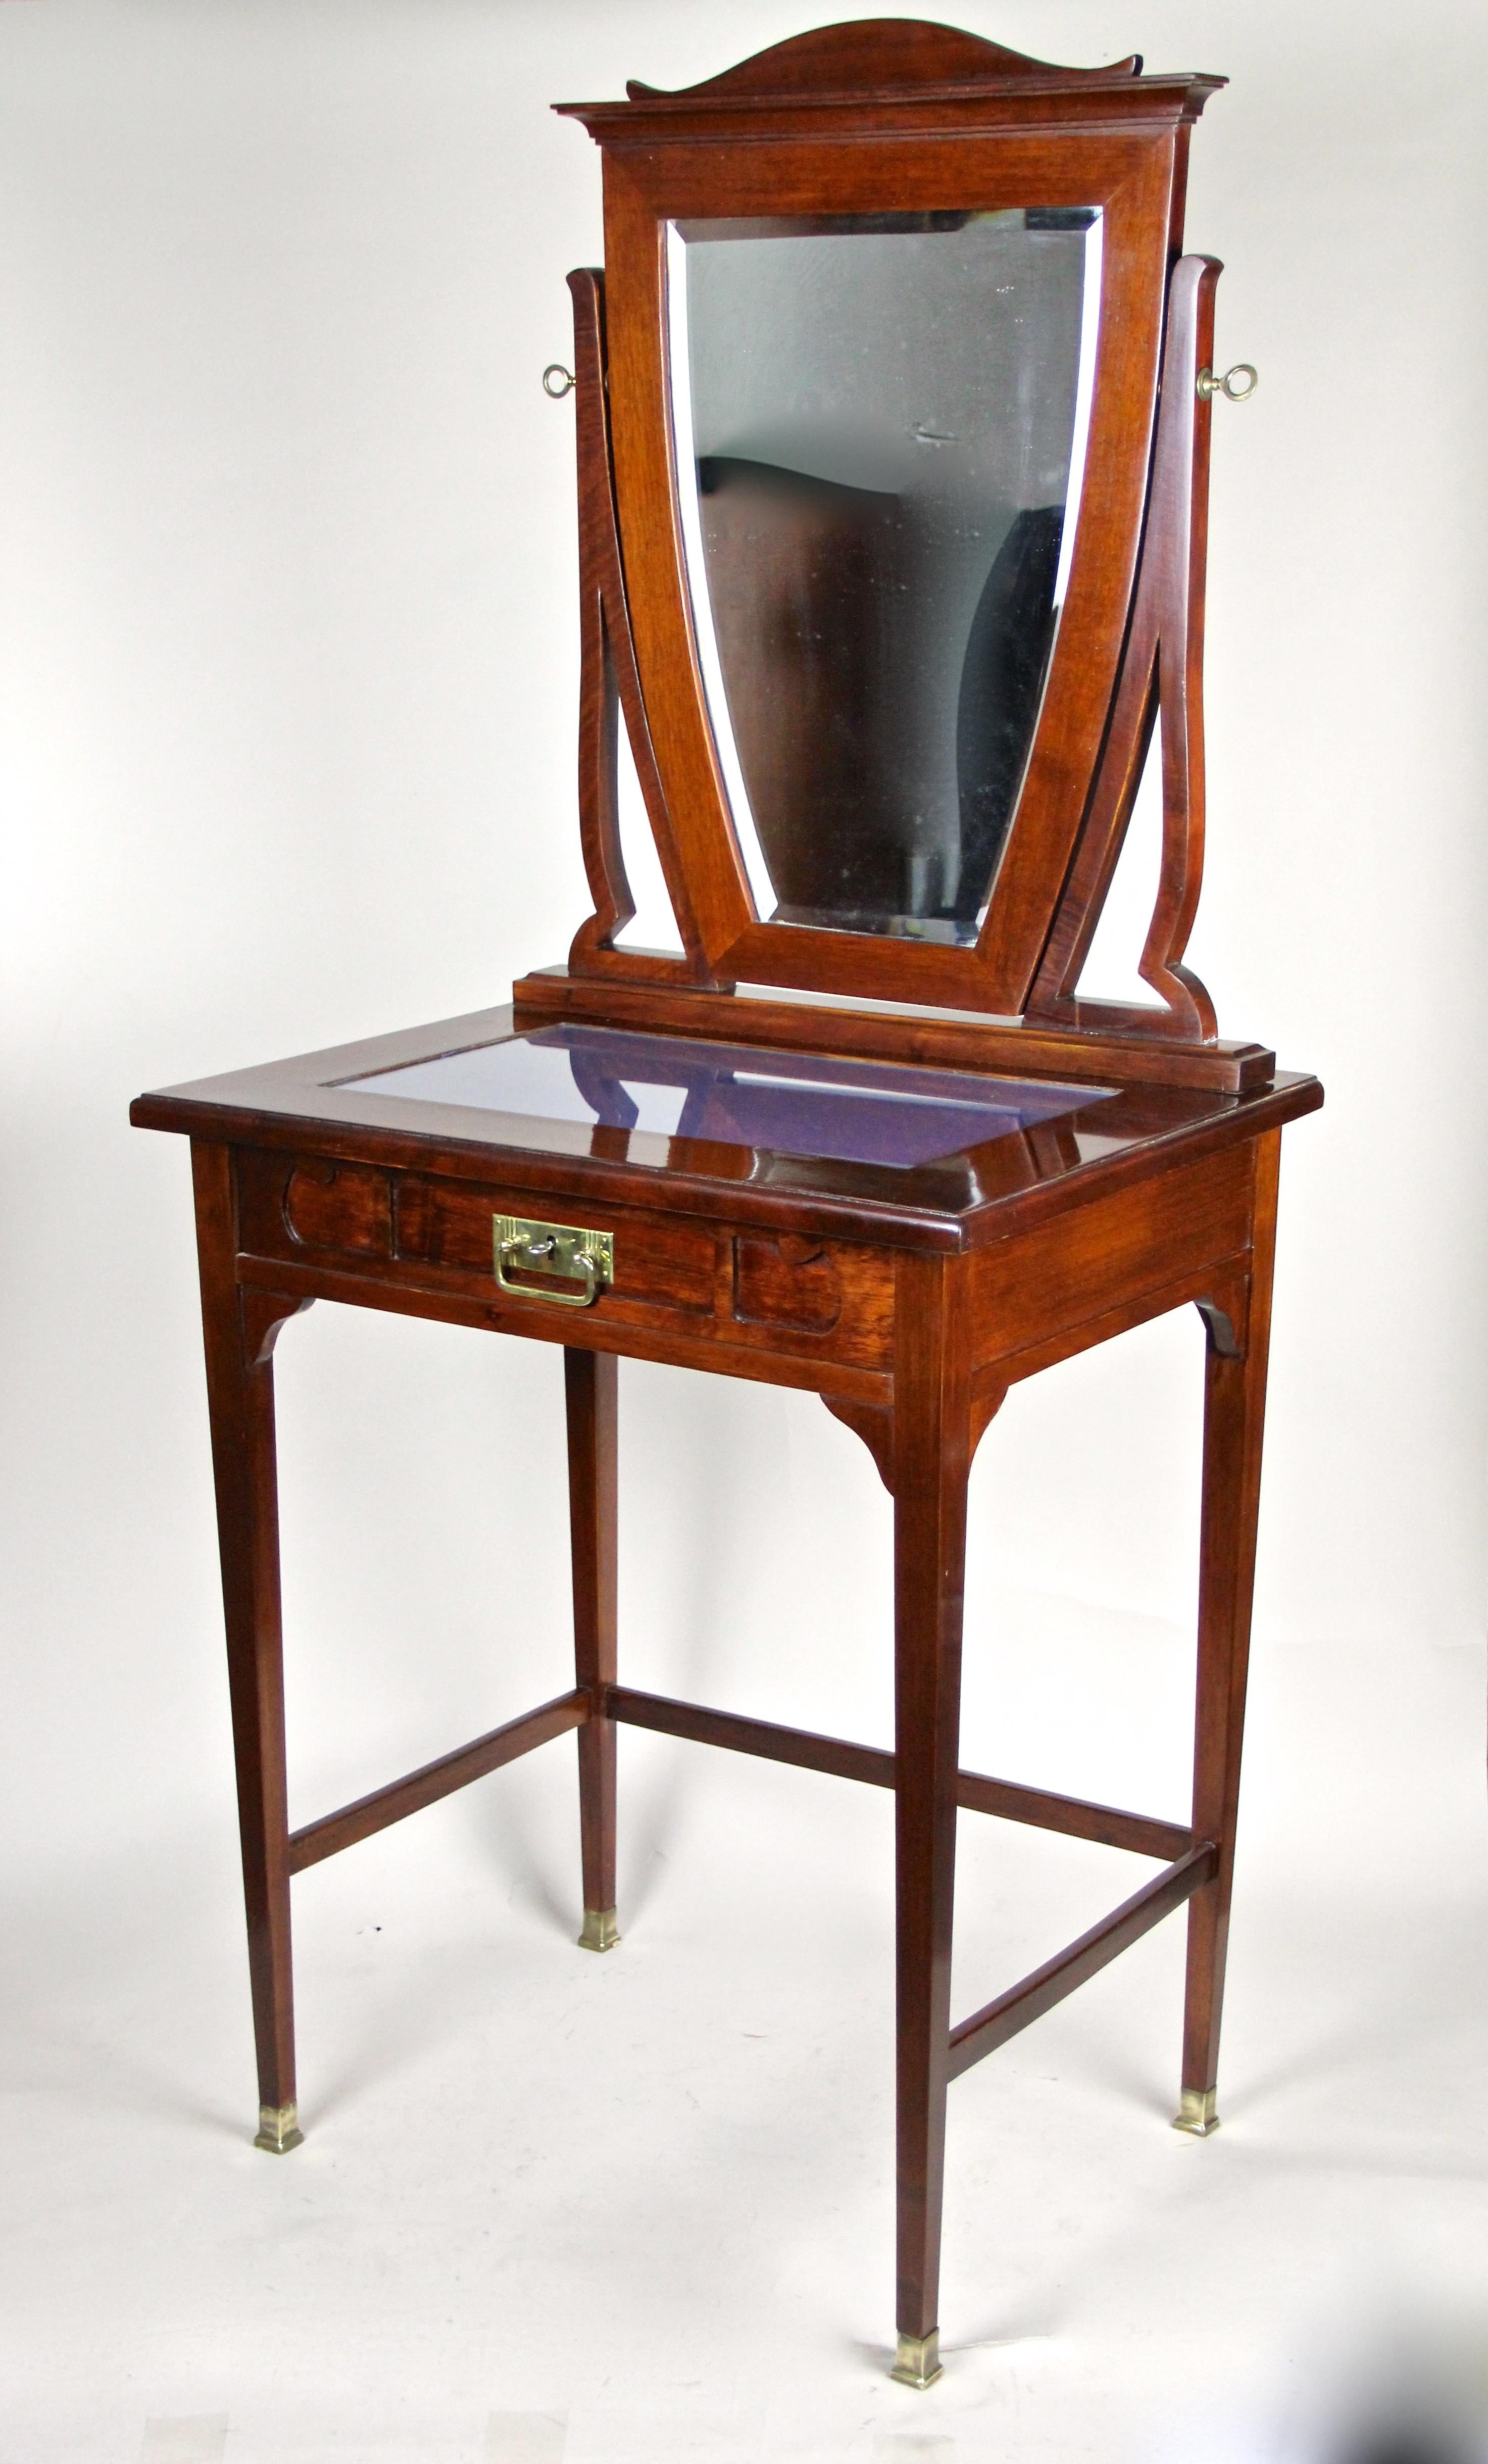 Fantastic Art Nouveau vanity table with swivel mounted mirror, made of beechwood and trimmed to a dark nut wood/ mahogany look. Elaborately processed in Austria circa early period of 1910, this incredibly charming vanity table covers one lockable